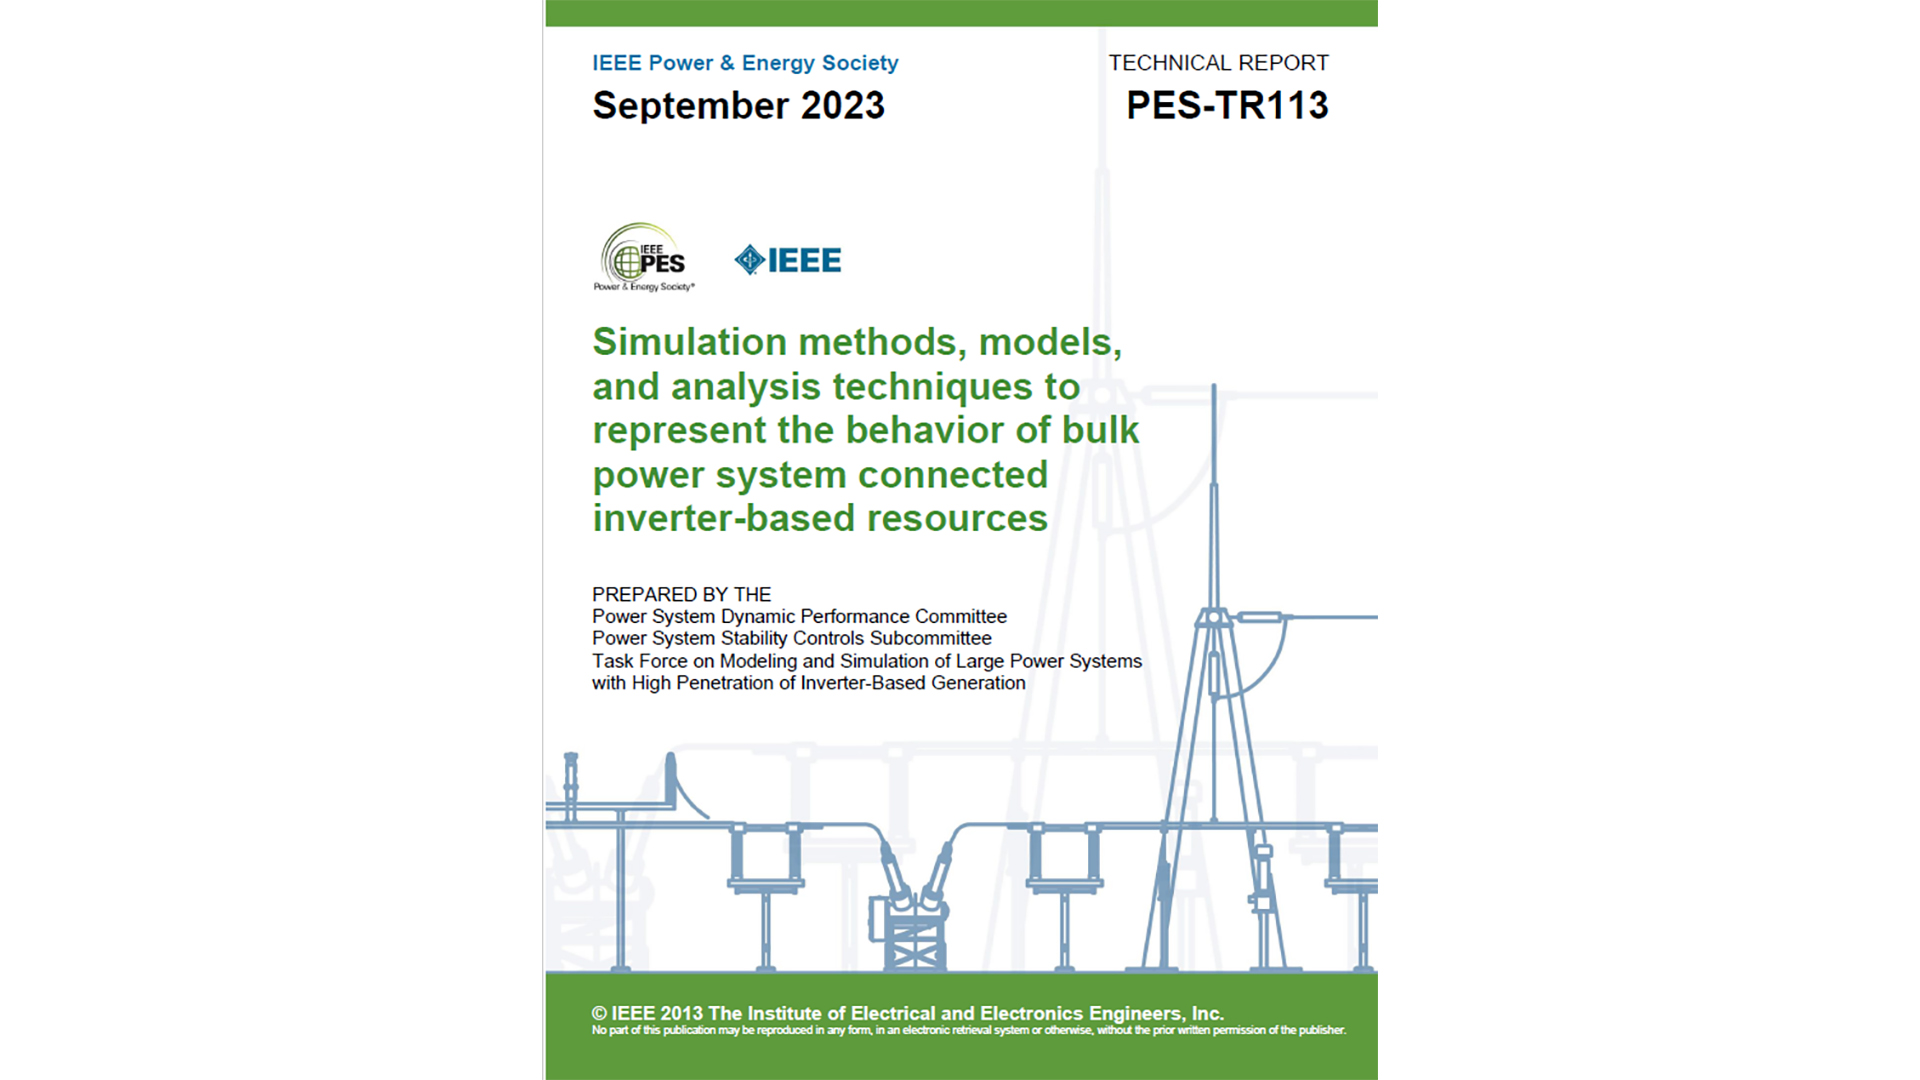 Simulation methods, models, and analysis techniques to represent the behavior of bulk power system connected inverter-based resources